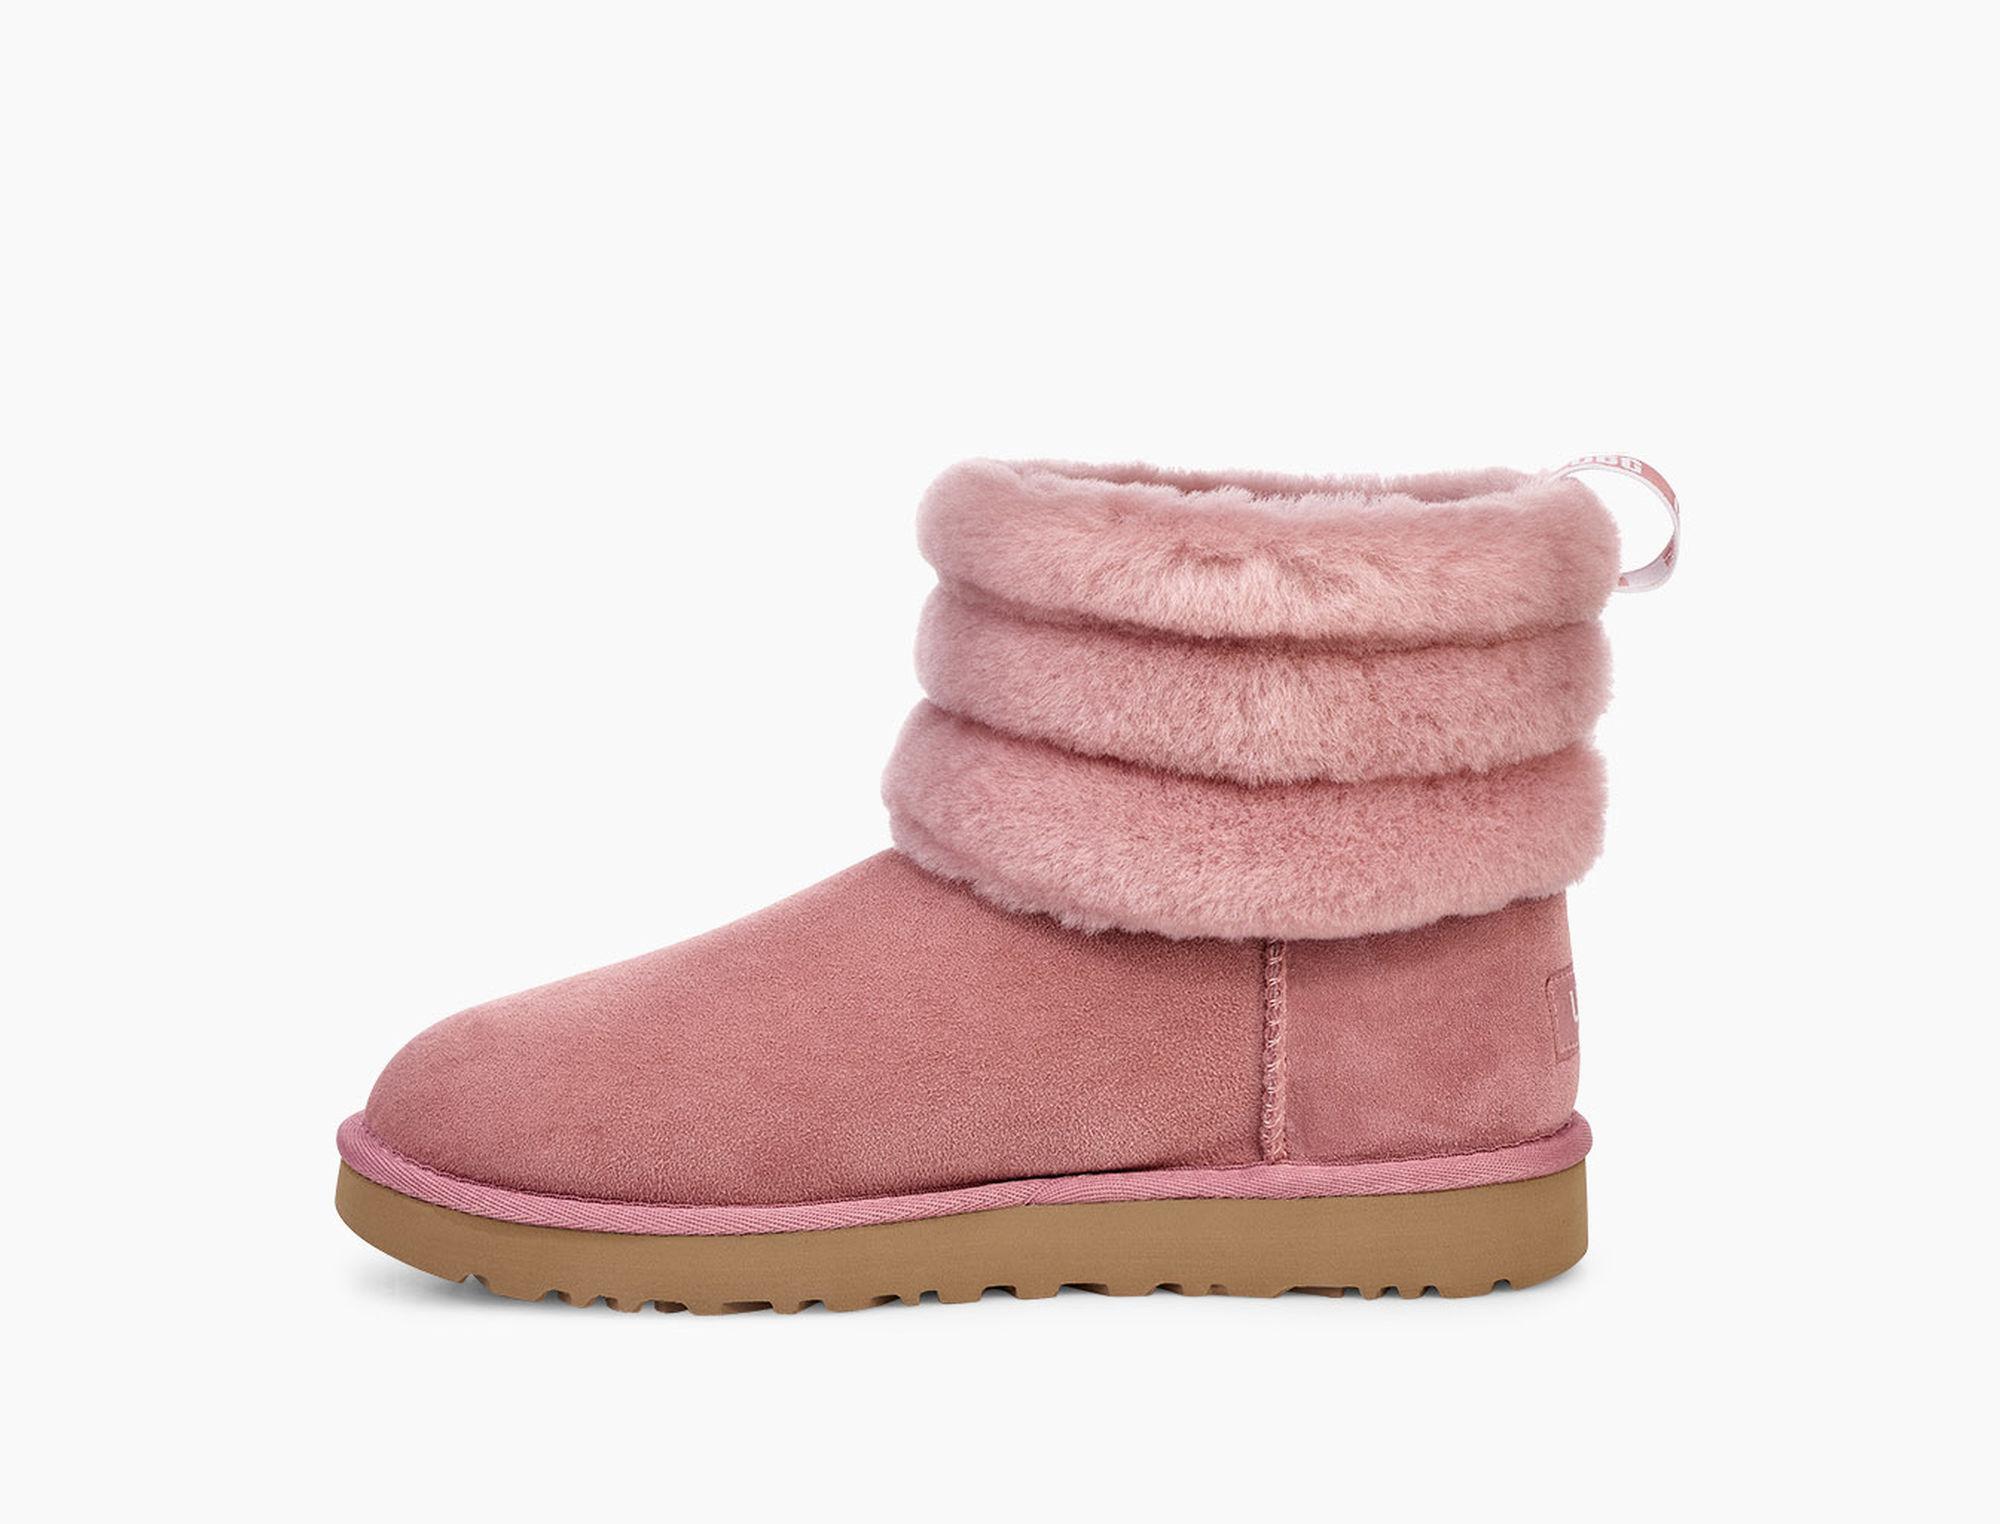 Buy > uggs boots pink > in stock